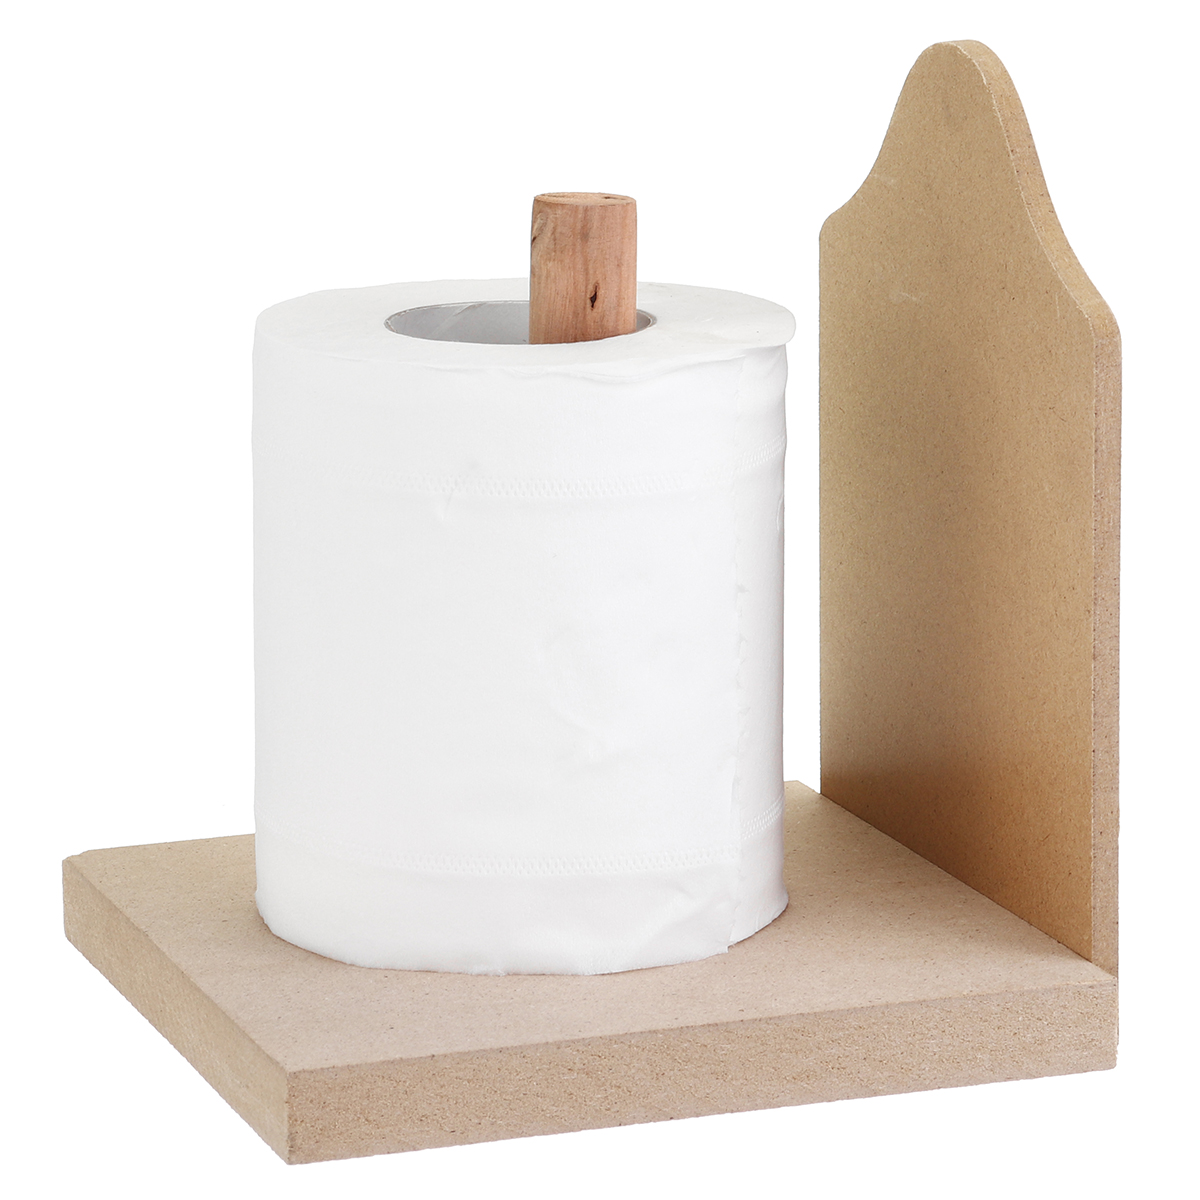 

Toilet Loo Wooden Roll Paper Holder Bathroom Wall Mounted Roll Storage Rack Tissue Box